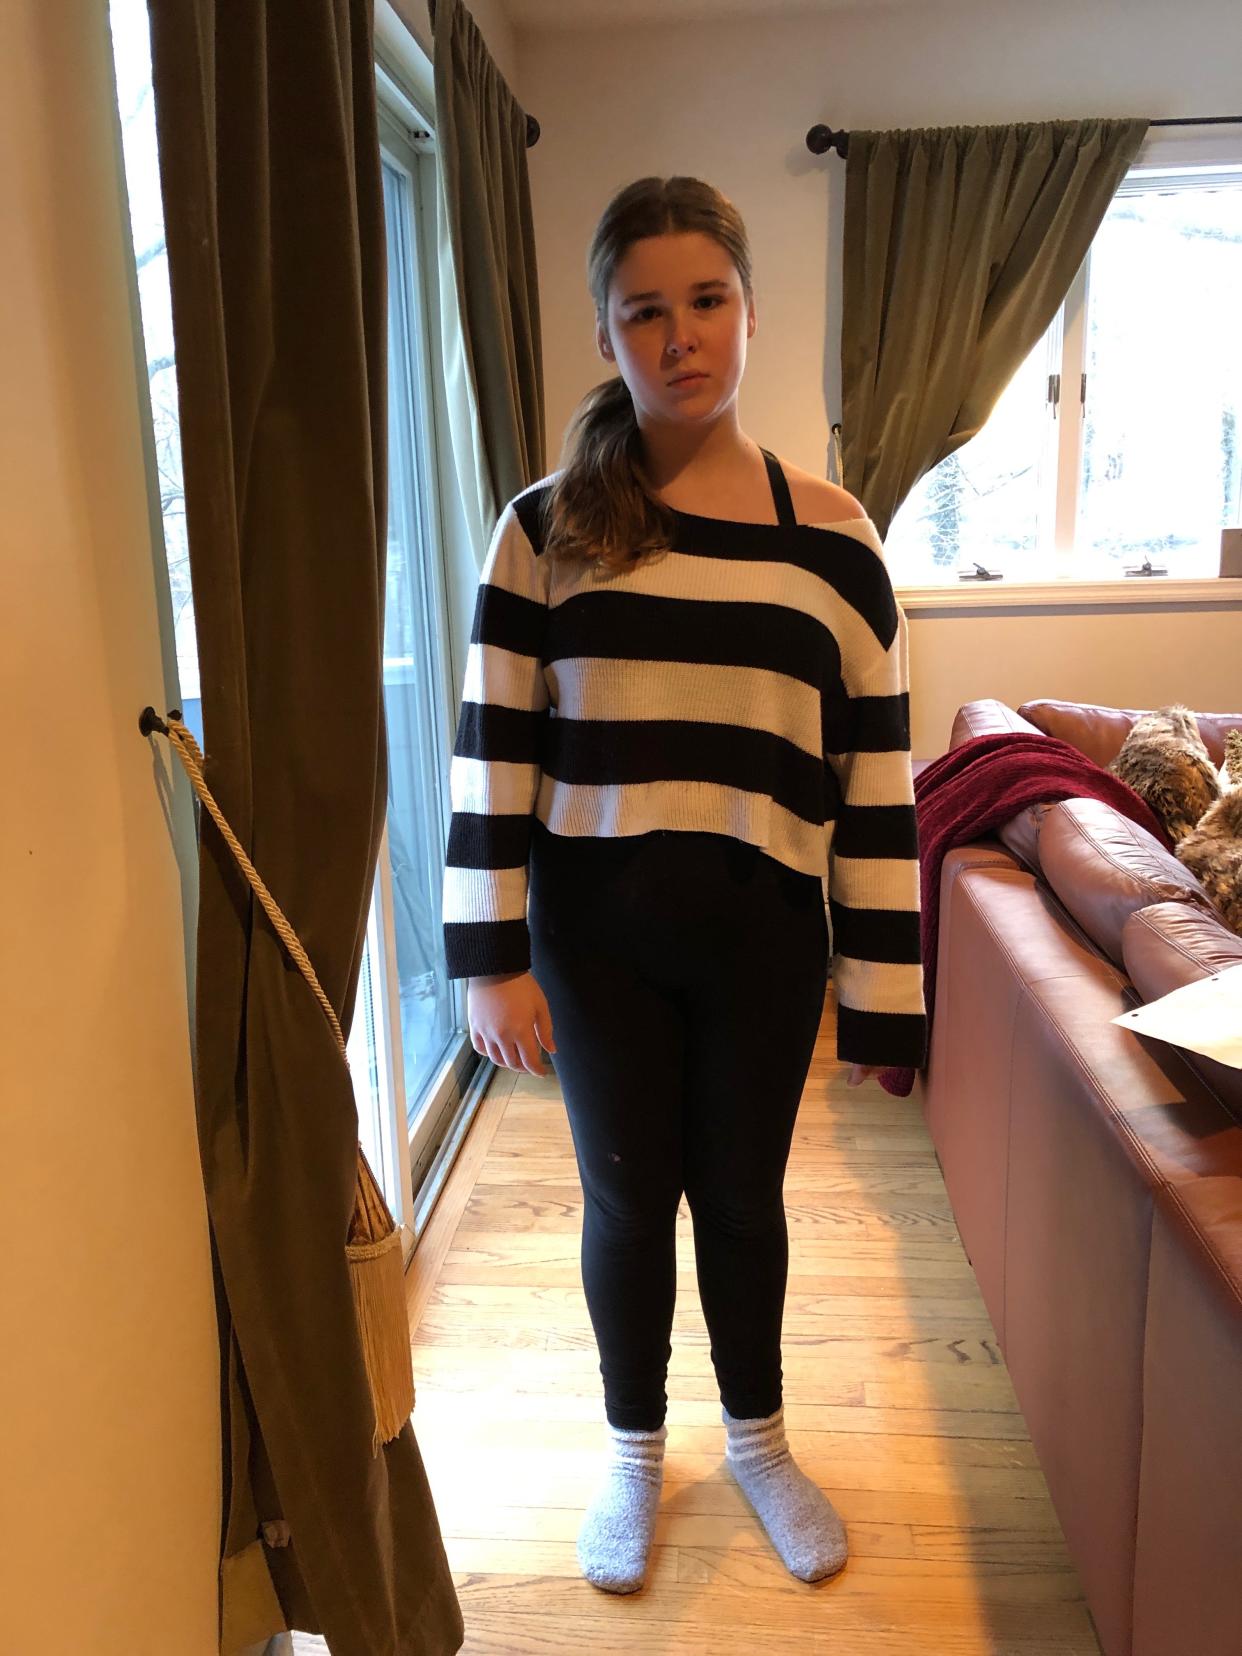 Samantha Wilson, an 8th-grade student at Irvington Middle School in N.Y. was dress-coded for her H&M sweater. Her family started a petition asking the school to reevaluate its rules. (Photo: Courtesy of Cydney Wilson)